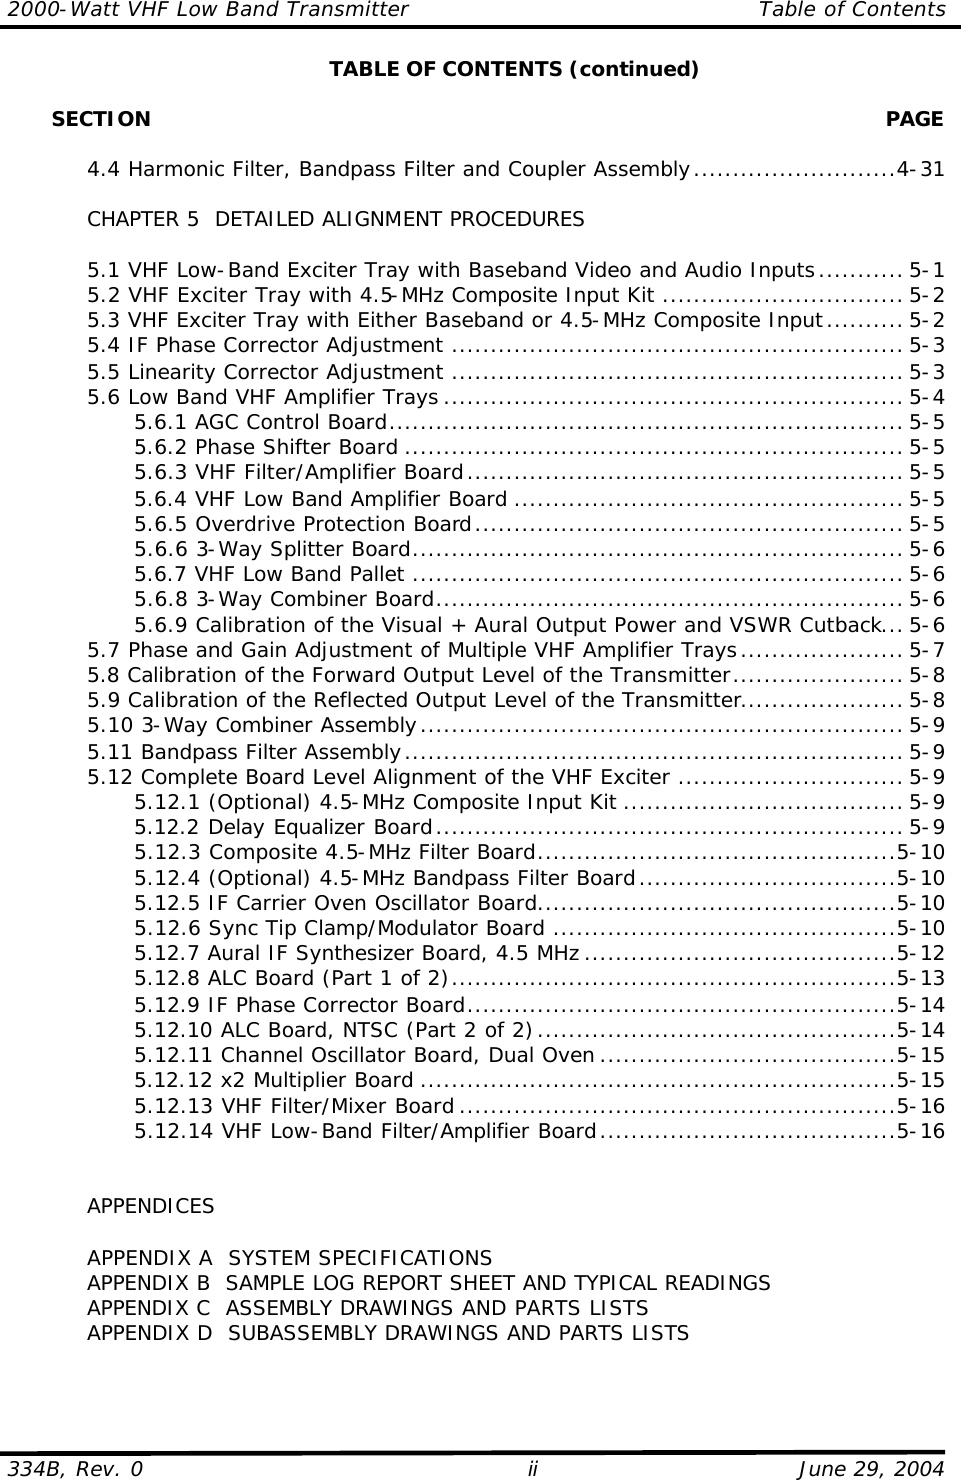 2000-Watt VHF Low Band Transmitter Table of Contents  334B, Rev. 0 ii June 29, 2004  TABLE OF CONTENTS (continued)         SECTION    PAGE   4.4 Harmonic Filter, Bandpass Filter and Coupler Assembly..........................4-31   CHAPTER 5  DETAILED ALIGNMENT PROCEDURES   5.1 VHF Low-Band Exciter Tray with Baseband Video and Audio Inputs........... 5-1  5.2 VHF Exciter Tray with 4.5-MHz Composite Input Kit ............................... 5-2  5.3 VHF Exciter Tray with Either Baseband or 4.5-MHz Composite Input.......... 5-2  5.4 IF Phase Corrector Adjustment .......................................................... 5-3  5.5 Linearity Corrector Adjustment .......................................................... 5-3 5.6 Low Band VHF Amplifier Trays ........................................................... 5-4     5.6.1 AGC Control Board.................................................................. 5-5     5.6.2 Phase Shifter Board ................................................................ 5-5     5.6.3 VHF Filter/Amplifier Board........................................................ 5-5     5.6.4 VHF Low Band Amplifier Board .................................................. 5-5     5.6.5 Overdrive Protection Board....................................................... 5-5     5.6.6 3-Way Splitter Board............................................................... 5-6     5.6.7 VHF Low Band Pallet ............................................................... 5-6     5.6.8 3-Way Combiner Board............................................................ 5-6     5.6.9 Calibration of the Visual + Aural Output Power and VSWR Cutback... 5-6  5.7 Phase and Gain Adjustment of Multiple VHF Amplifier Trays..................... 5-7  5.8 Calibration of the Forward Output Level of the Transmitter...................... 5-8  5.9 Calibration of the Reflected Output Level of the Transmitter..................... 5-8  5.10 3-Way Combiner Assembly.............................................................. 5-9  5.11 Bandpass Filter Assembly................................................................ 5-9  5.12 Complete Board Level Alignment of the VHF Exciter ............................. 5-9     5.12.1 (Optional) 4.5-MHz Composite Input Kit .................................... 5-9     5.12.2 Delay Equalizer Board............................................................ 5-9     5.12.3 Composite 4.5-MHz Filter Board..............................................5-10     5.12.4 (Optional) 4.5-MHz Bandpass Filter Board.................................5-10     5.12.5 IF Carrier Oven Oscillator Board..............................................5-10     5.12.6 Sync Tip Clamp/Modulator Board ............................................5-10     5.12.7 Aural IF Synthesizer Board, 4.5 MHz ........................................5-12     5.12.8 ALC Board (Part 1 of 2).........................................................5-13     5.12.9 IF Phase Corrector Board.......................................................5-14     5.12.10 ALC Board, NTSC (Part 2 of 2)..............................................5-14     5.12.11 Channel Oscillator Board, Dual Oven ......................................5-15     5.12.12 x2 Multiplier Board .............................................................5-15     5.12.13 VHF Filter/Mixer Board ........................................................5-16     5.12.14 VHF Low-Band Filter/Amplifier Board......................................5-16        APPENDICES   APPENDIX A  SYSTEM SPECIFICATIONS  APPENDIX B  SAMPLE LOG REPORT SHEET AND TYPICAL READINGS  APPENDIX C  ASSEMBLY DRAWINGS AND PARTS LISTS  APPENDIX D  SUBASSEMBLY DRAWINGS AND PARTS LISTS  